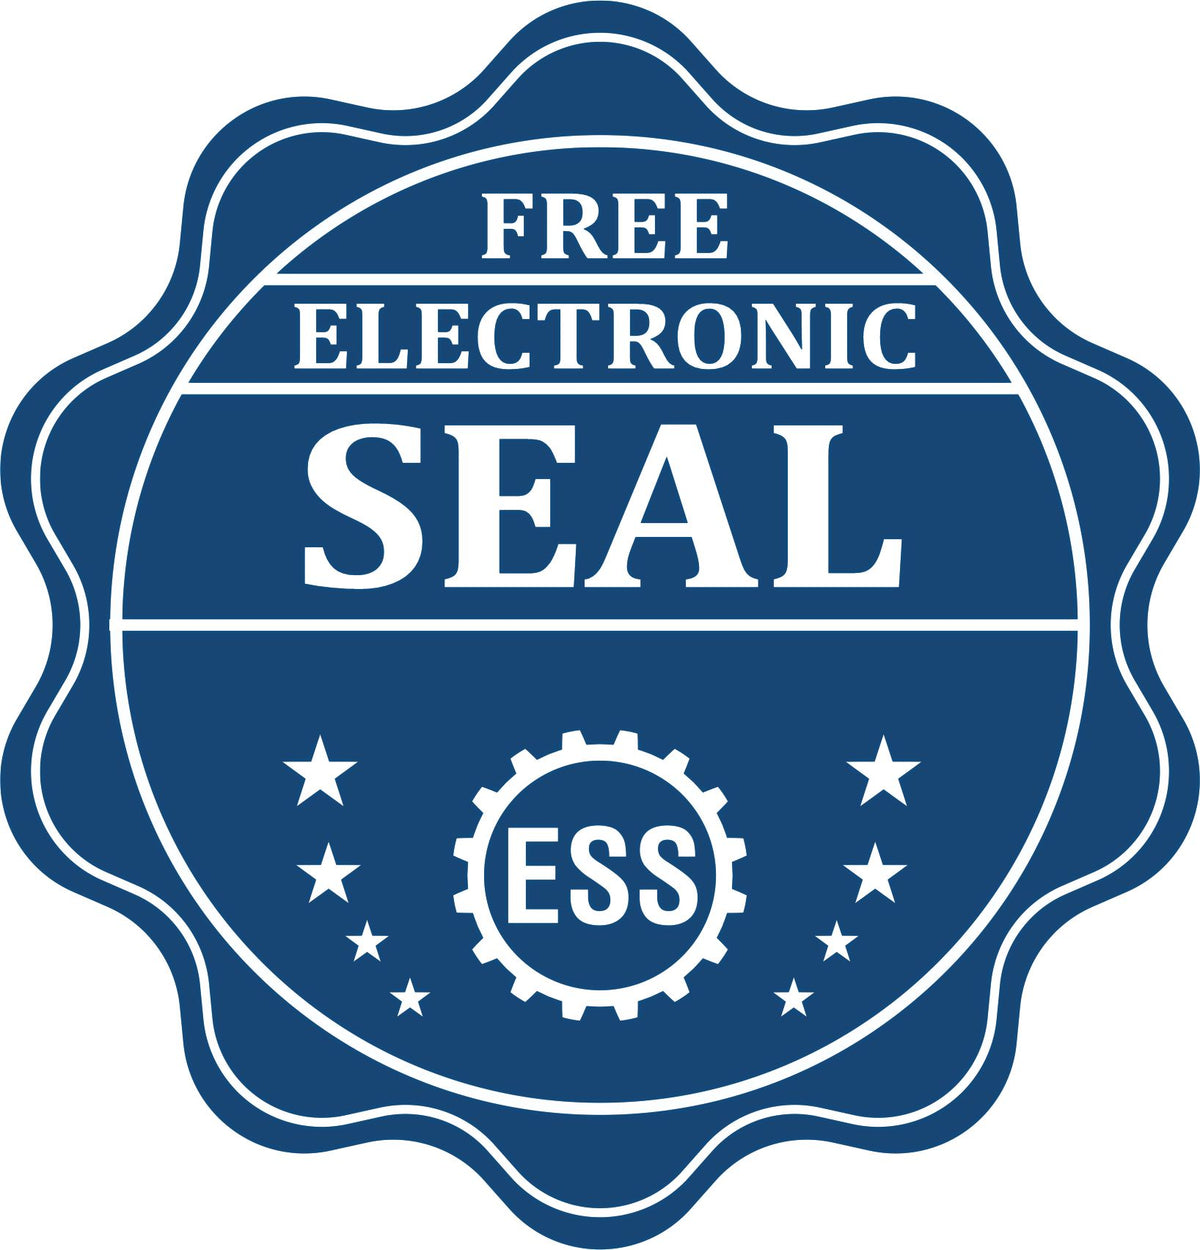 A badge showing a free electronic seal for the Premium MaxLight Pre-Inked New Jersey Geology Stamp with stars and the ESS gear on the emblem.